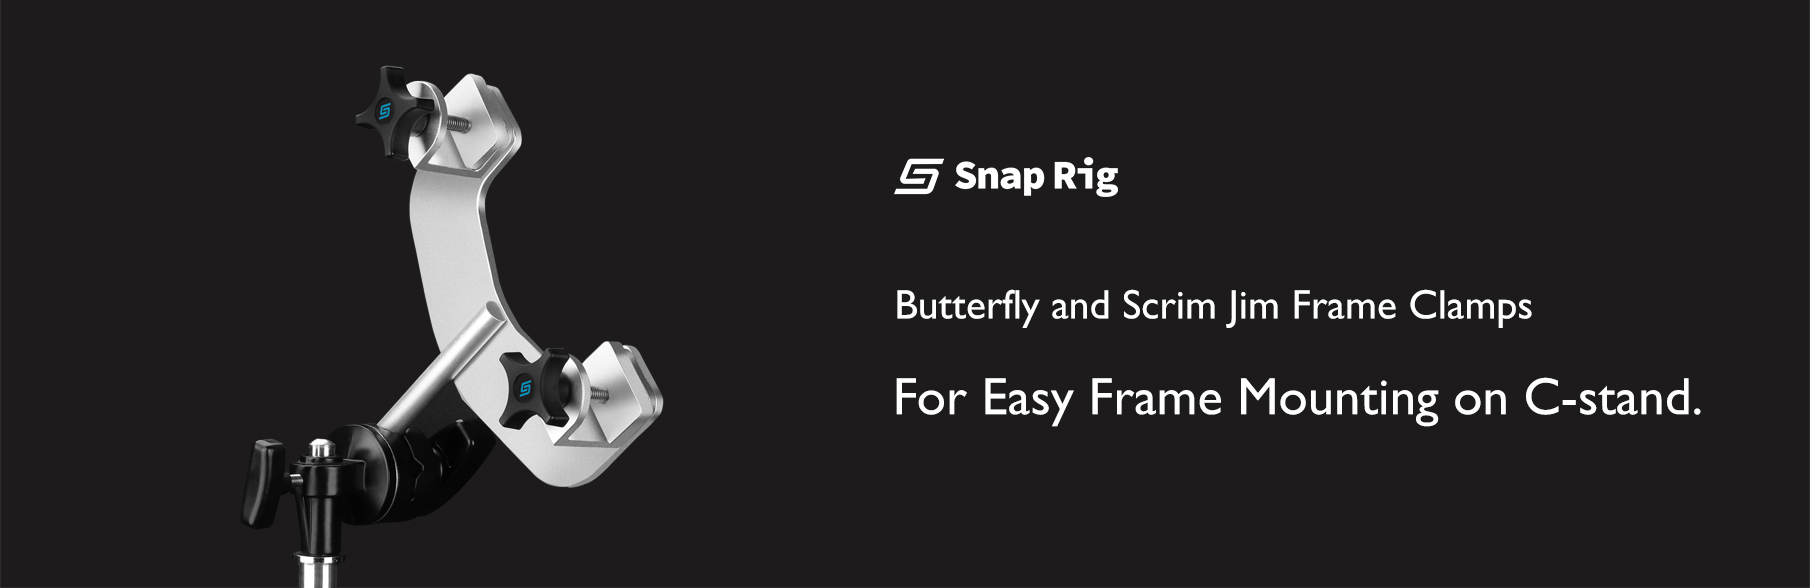 Proaim SnapRig Clamps for Butterfly & Scrim Jim Frame